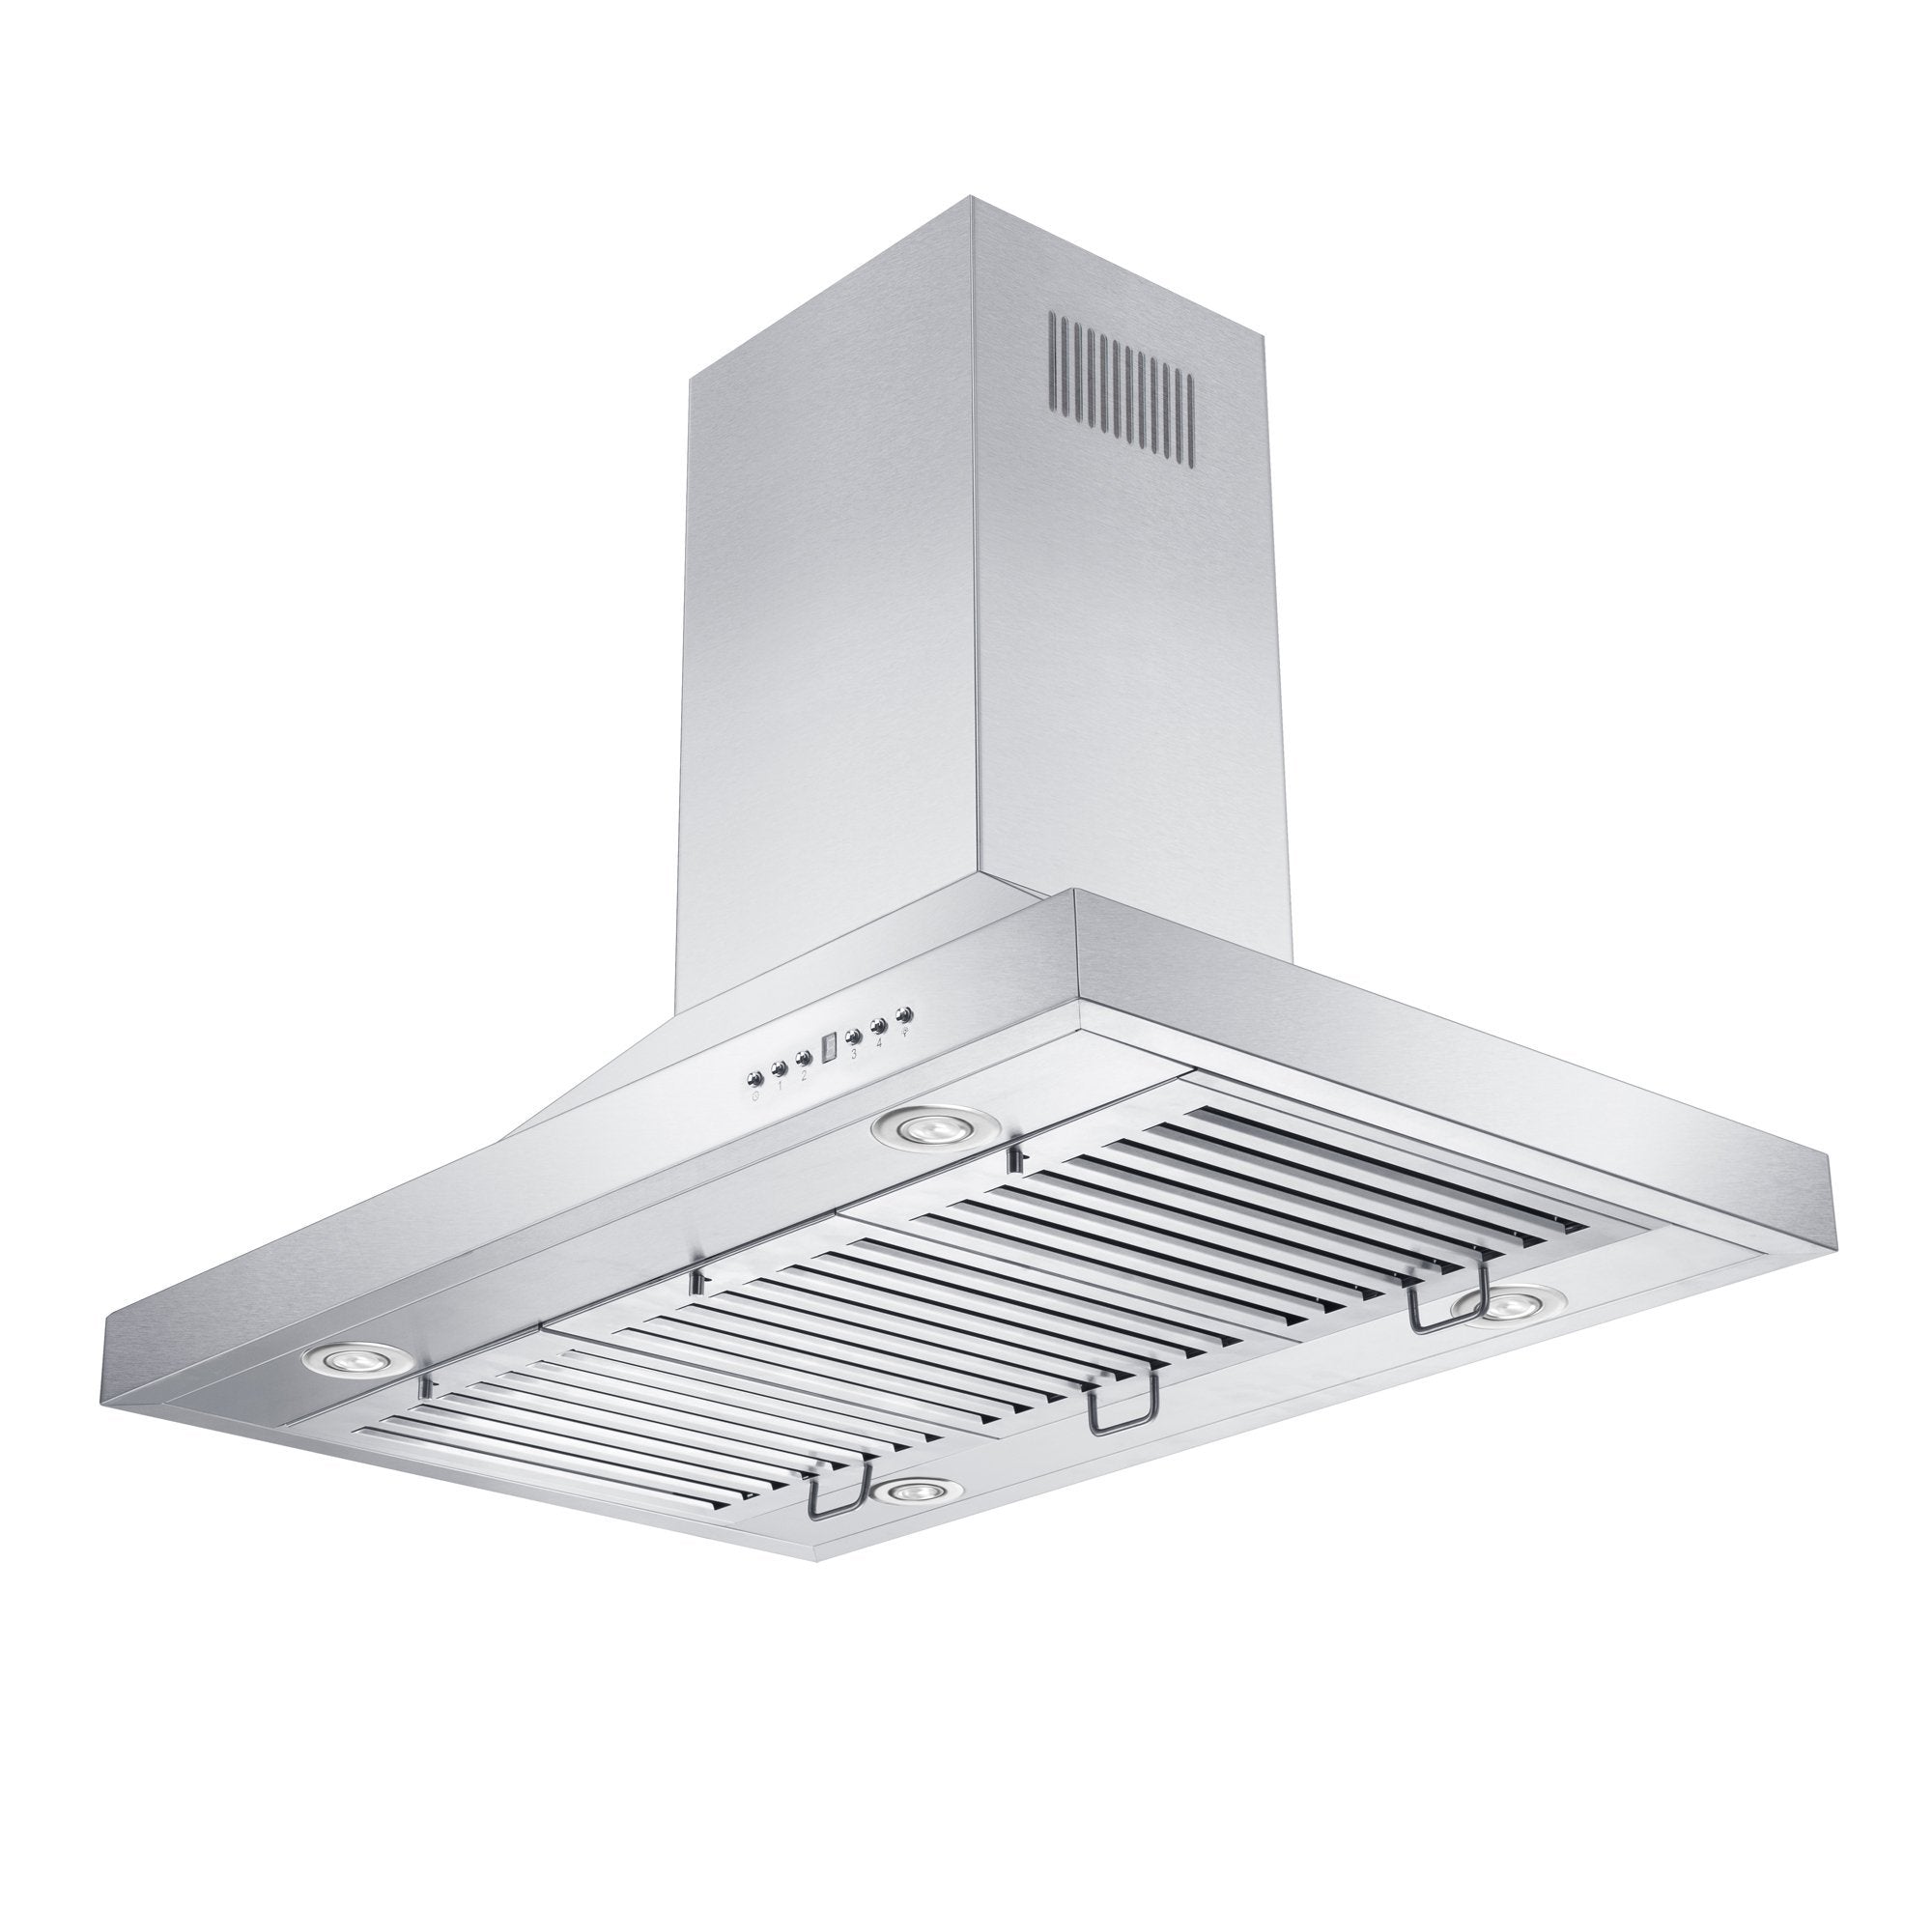 30" Convertible Vent Island Mount Range Hood in Stainless Steel (GL2i-30)